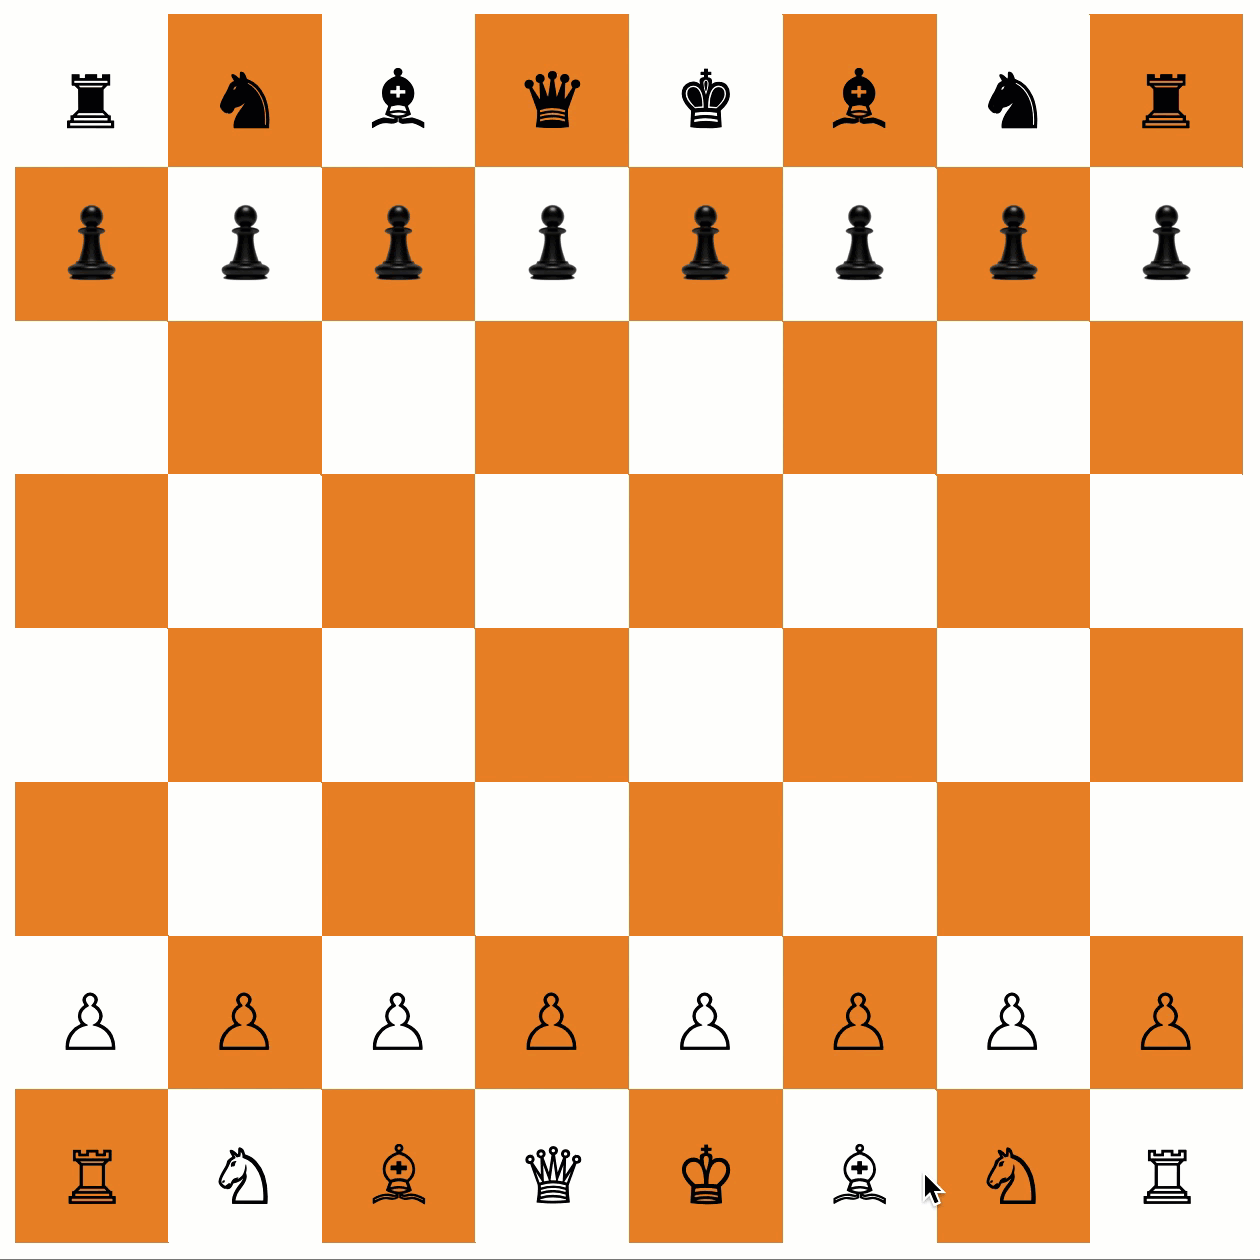 [https://chenhuijing.com/blog/recreating-the-fools-mate-chess-move-with-css-grid/](https://chenhuijing.com/blog/recreating-the-fools-mate-chess-move-with-css-grid/)